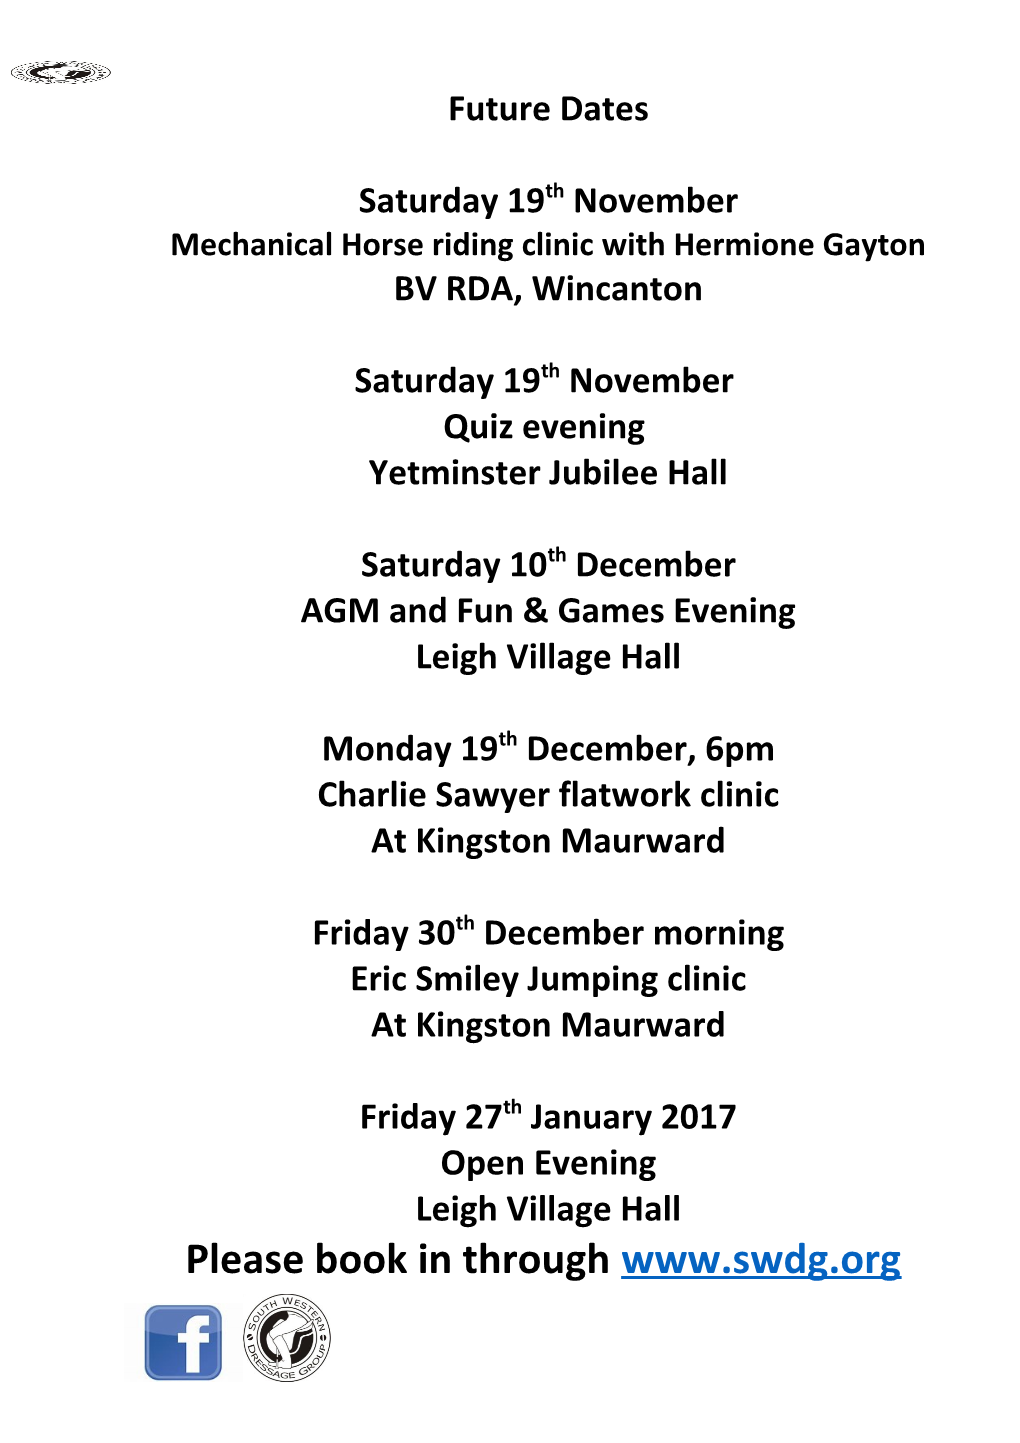 Mechanical Horse Riding Clinic with Hermione Gayton